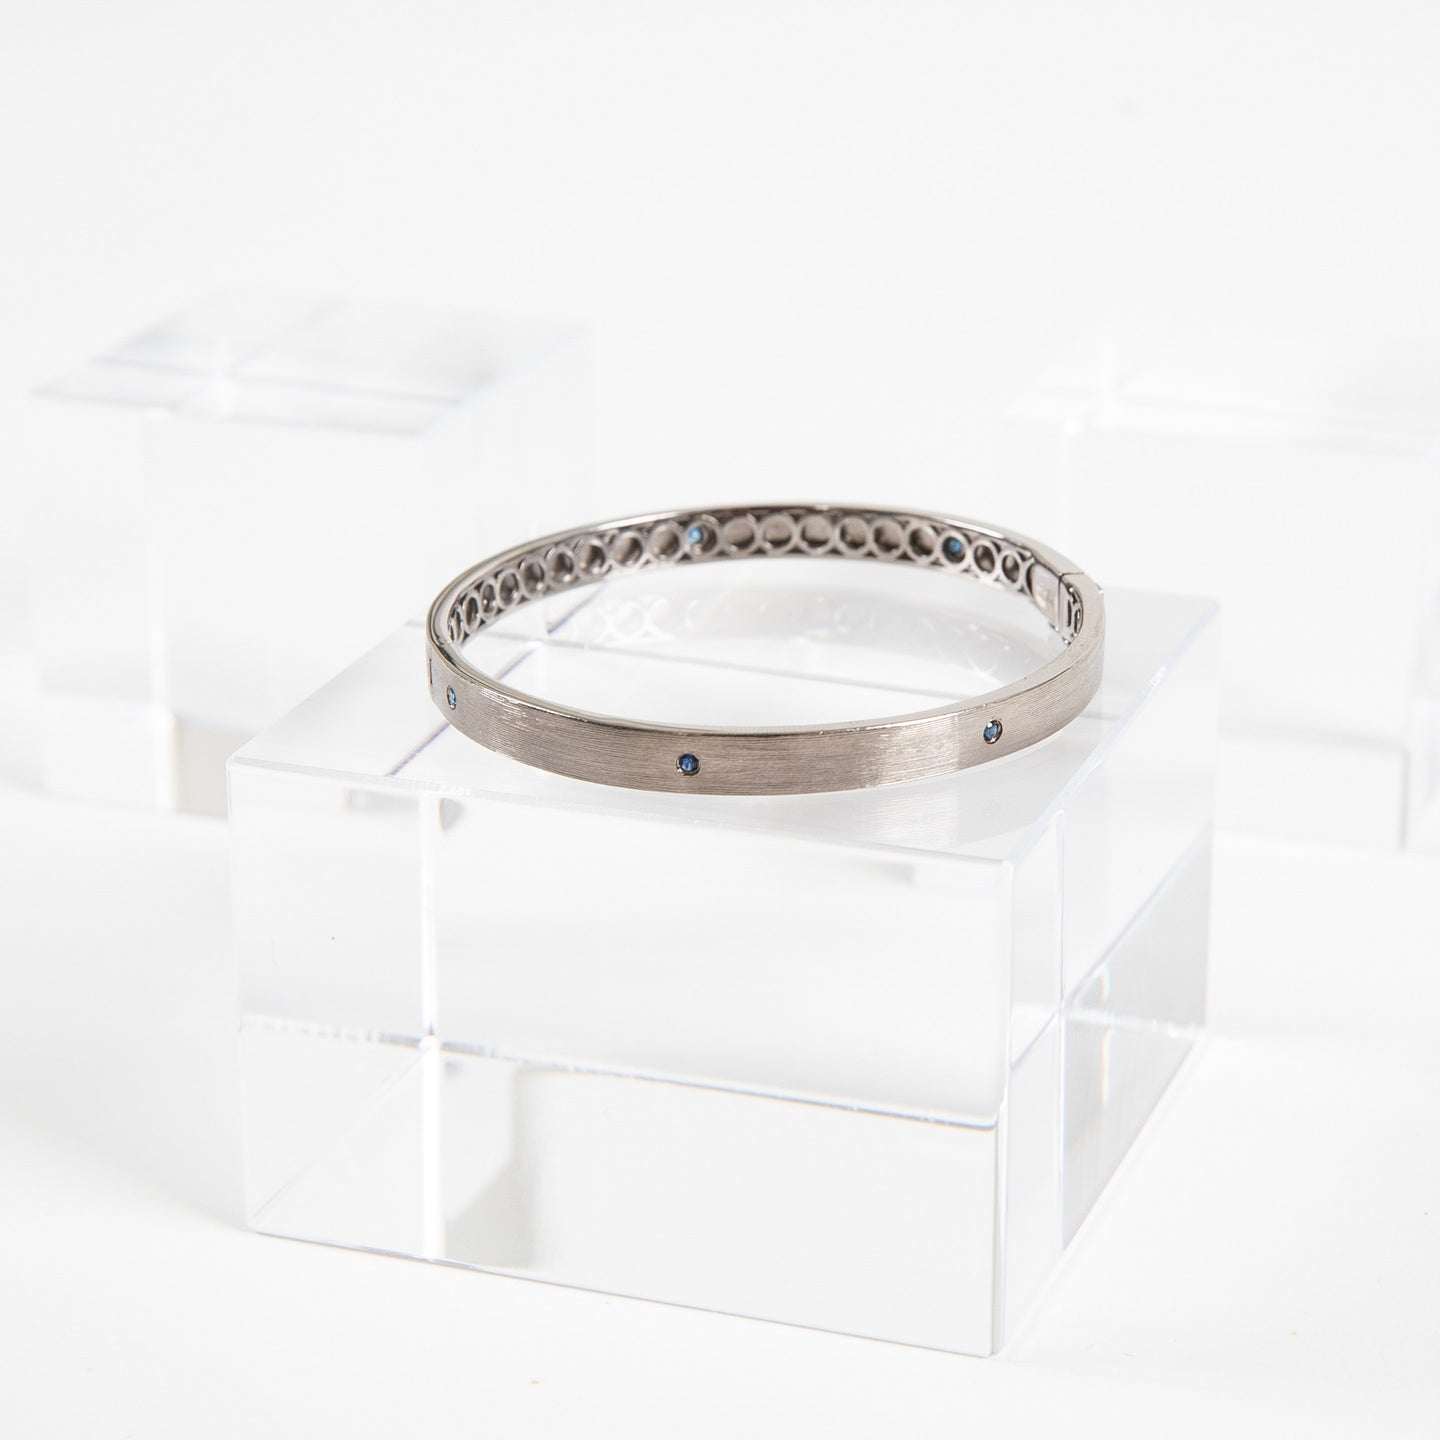 Meredith Marks<br> Sterling Silver Nick Bangle with Blue Sapphires